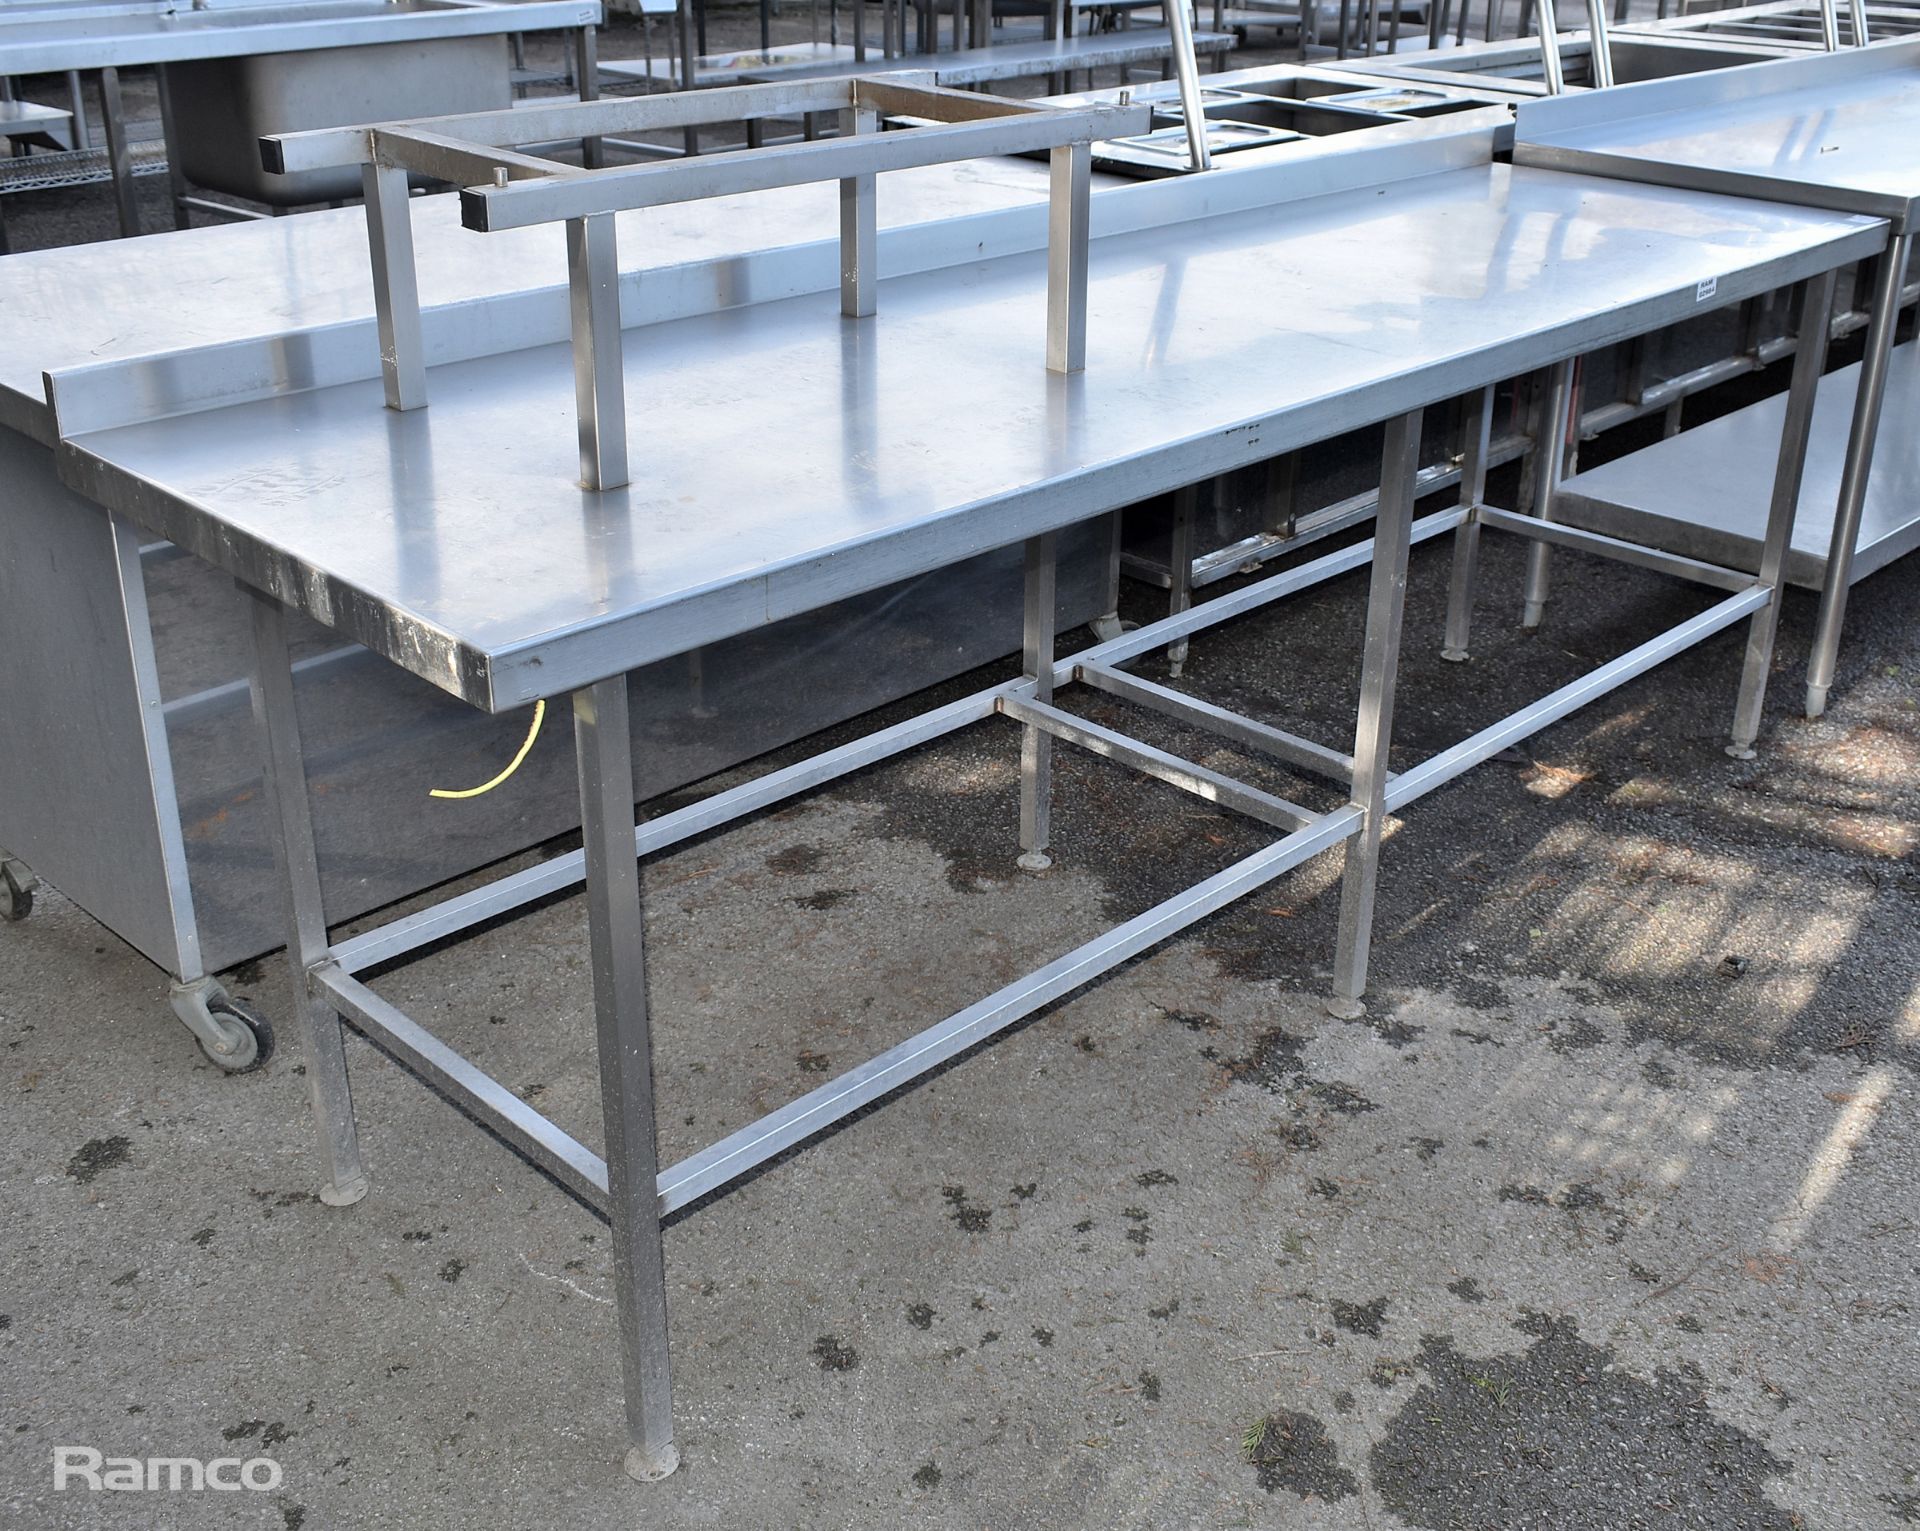 Stainless steel table with upstand and bracket for appliances - L 240 x W 70 x H 110cm - Image 2 of 4